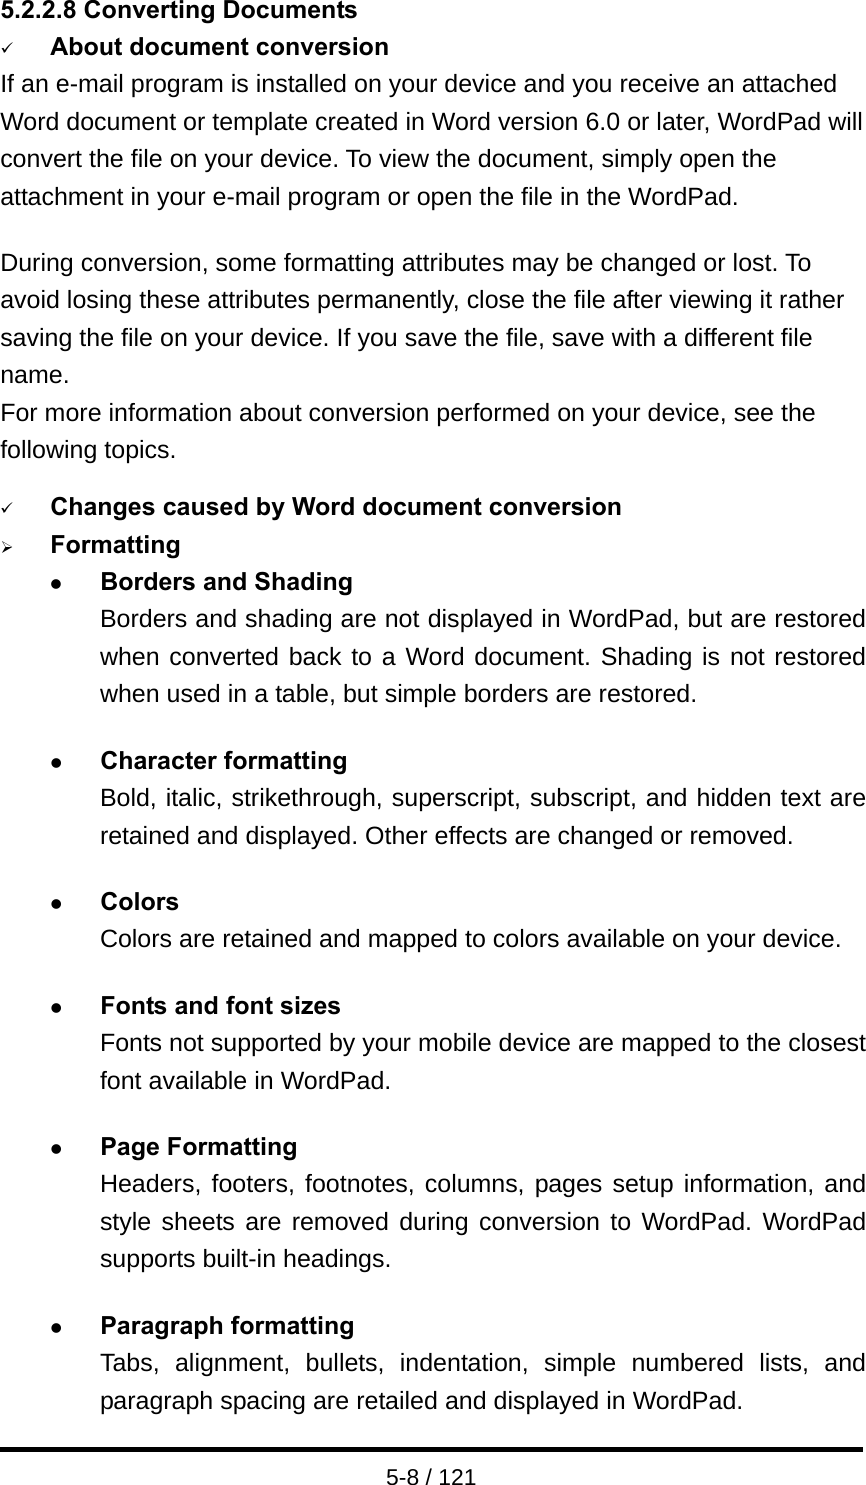  5-8 / 121 5.2.2.8 Converting Documents 9 About document conversion If an e-mail program is installed on your device and you receive an attached Word document or template created in Word version 6.0 or later, WordPad will convert the file on your device. To view the document, simply open the attachment in your e-mail program or open the file in the WordPad.  During conversion, some formatting attributes may be changed or lost. To avoid losing these attributes permanently, close the file after viewing it rather saving the file on your device. If you save the file, save with a different file name. For more information about conversion performed on your device, see the following topics.  9 Changes caused by Word document conversion ¾ Formatting z Borders and Shading Borders and shading are not displayed in WordPad, but are restored when converted back to a Word document. Shading is not restored when used in a table, but simple borders are restored.  z Character formatting Bold, italic, strikethrough, superscript, subscript, and hidden text are retained and displayed. Other effects are changed or removed.  z Colors Colors are retained and mapped to colors available on your device.  z Fonts and font sizes Fonts not supported by your mobile device are mapped to the closest font available in WordPad.  z Page Formatting Headers, footers, footnotes, columns, pages setup information, and style sheets are removed during conversion to WordPad. WordPad supports built-in headings.  z Paragraph formatting Tabs, alignment, bullets, indentation, simple numbered lists, and paragraph spacing are retailed and displayed in WordPad. 